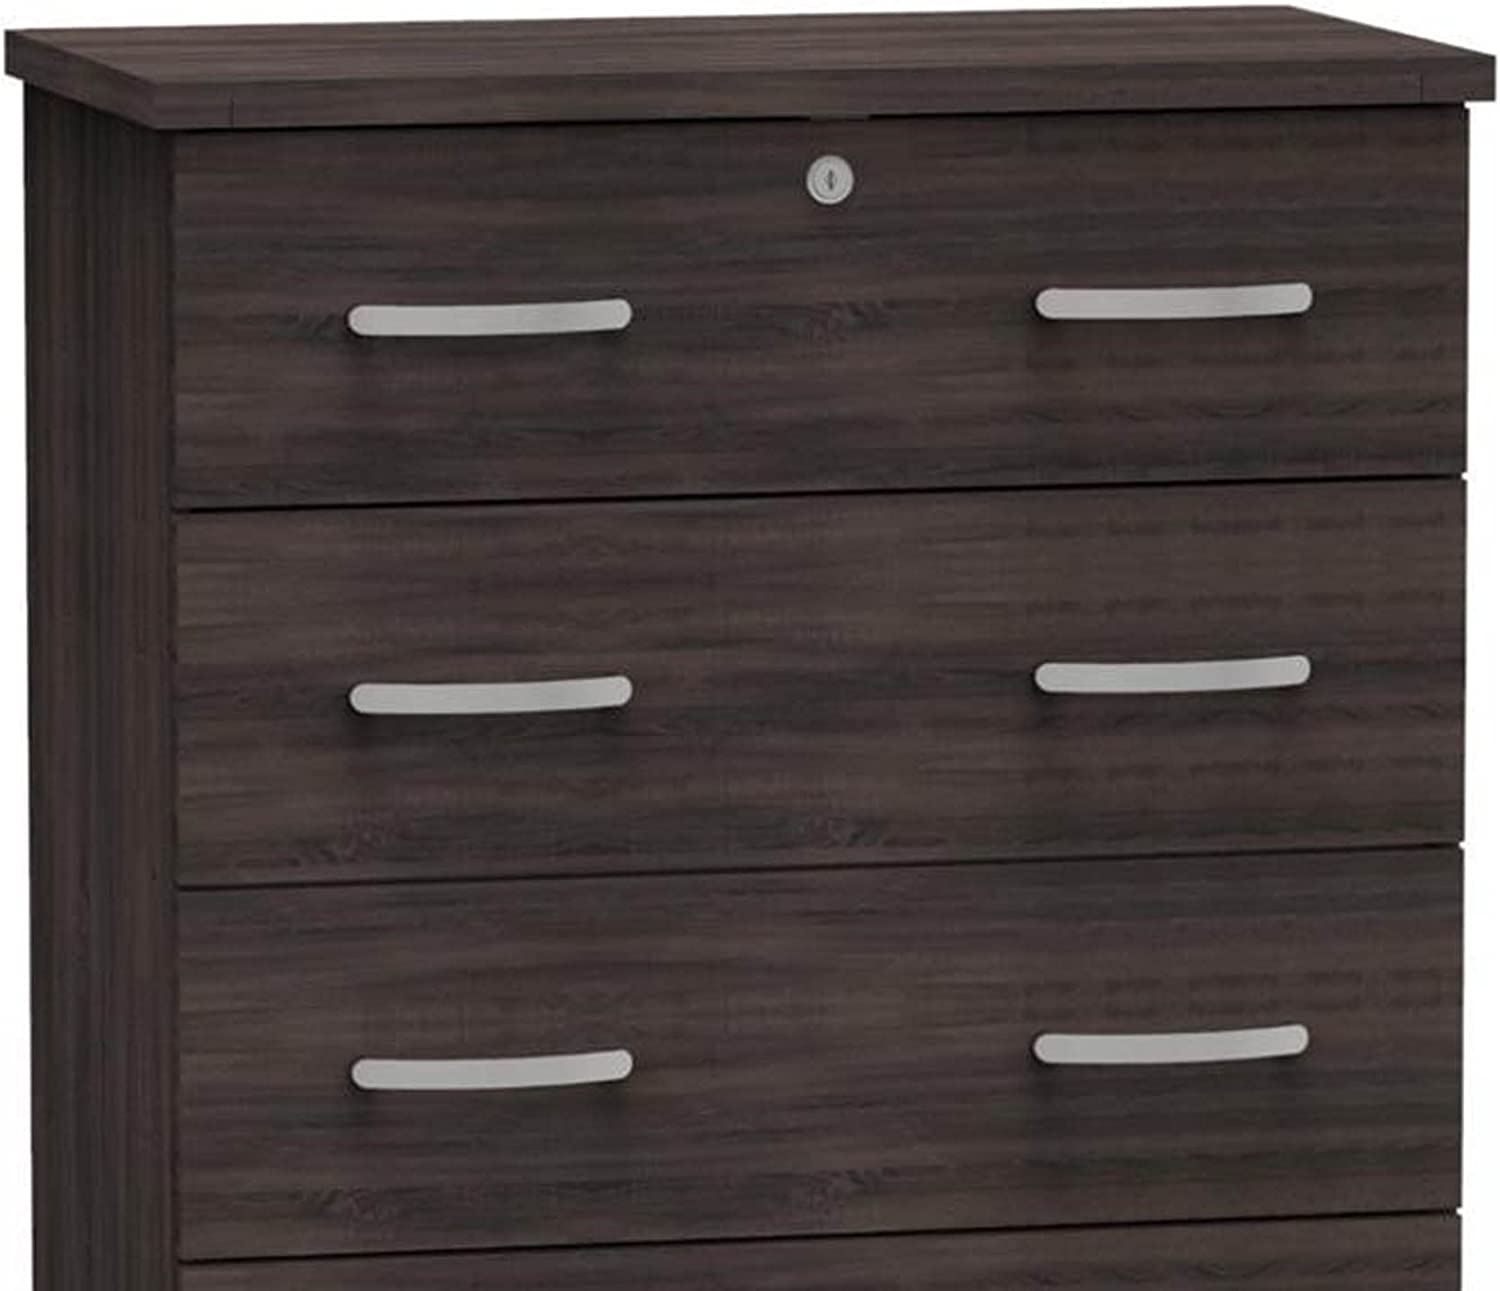 Better Home Products Cindy 5 Drawer Chest Wooden Dresser with Lock Pecan (Gold)